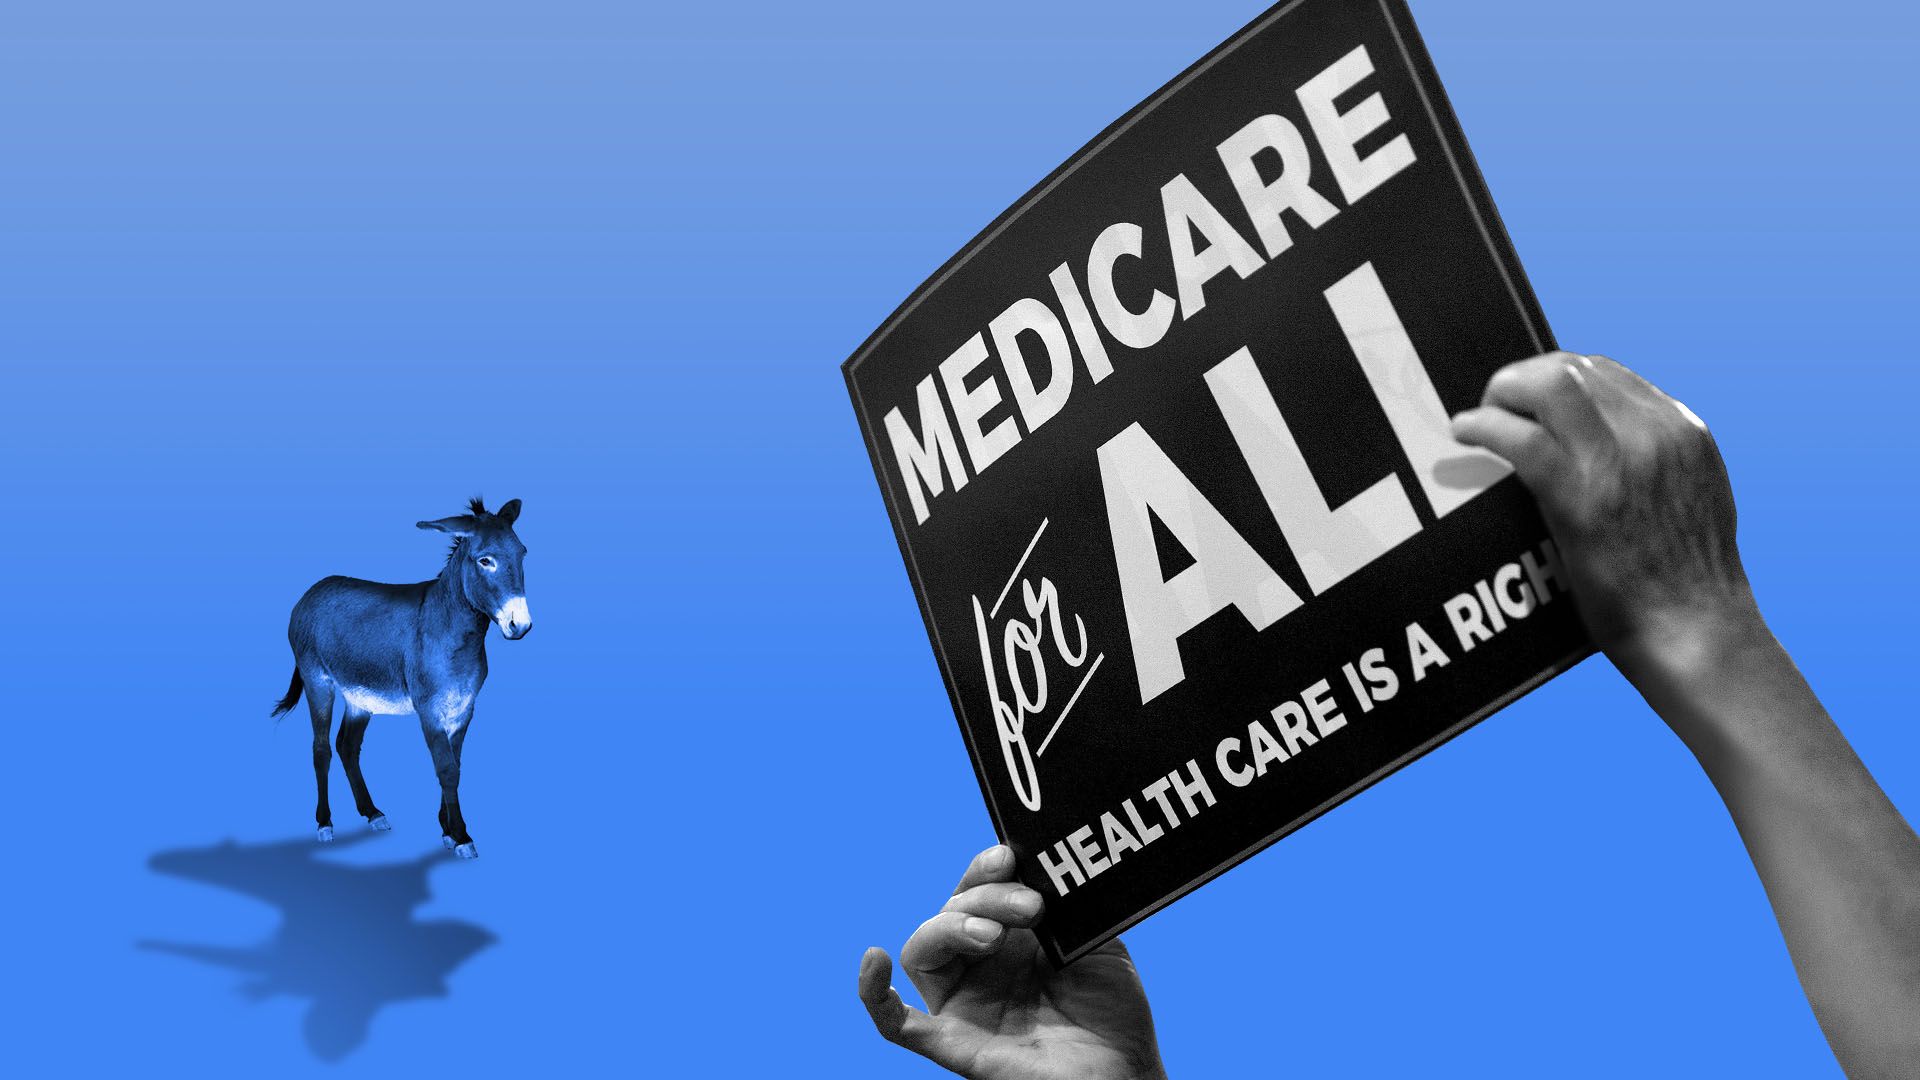 Illustration of a small donkey faced with a giant Medicare-for-all protestor